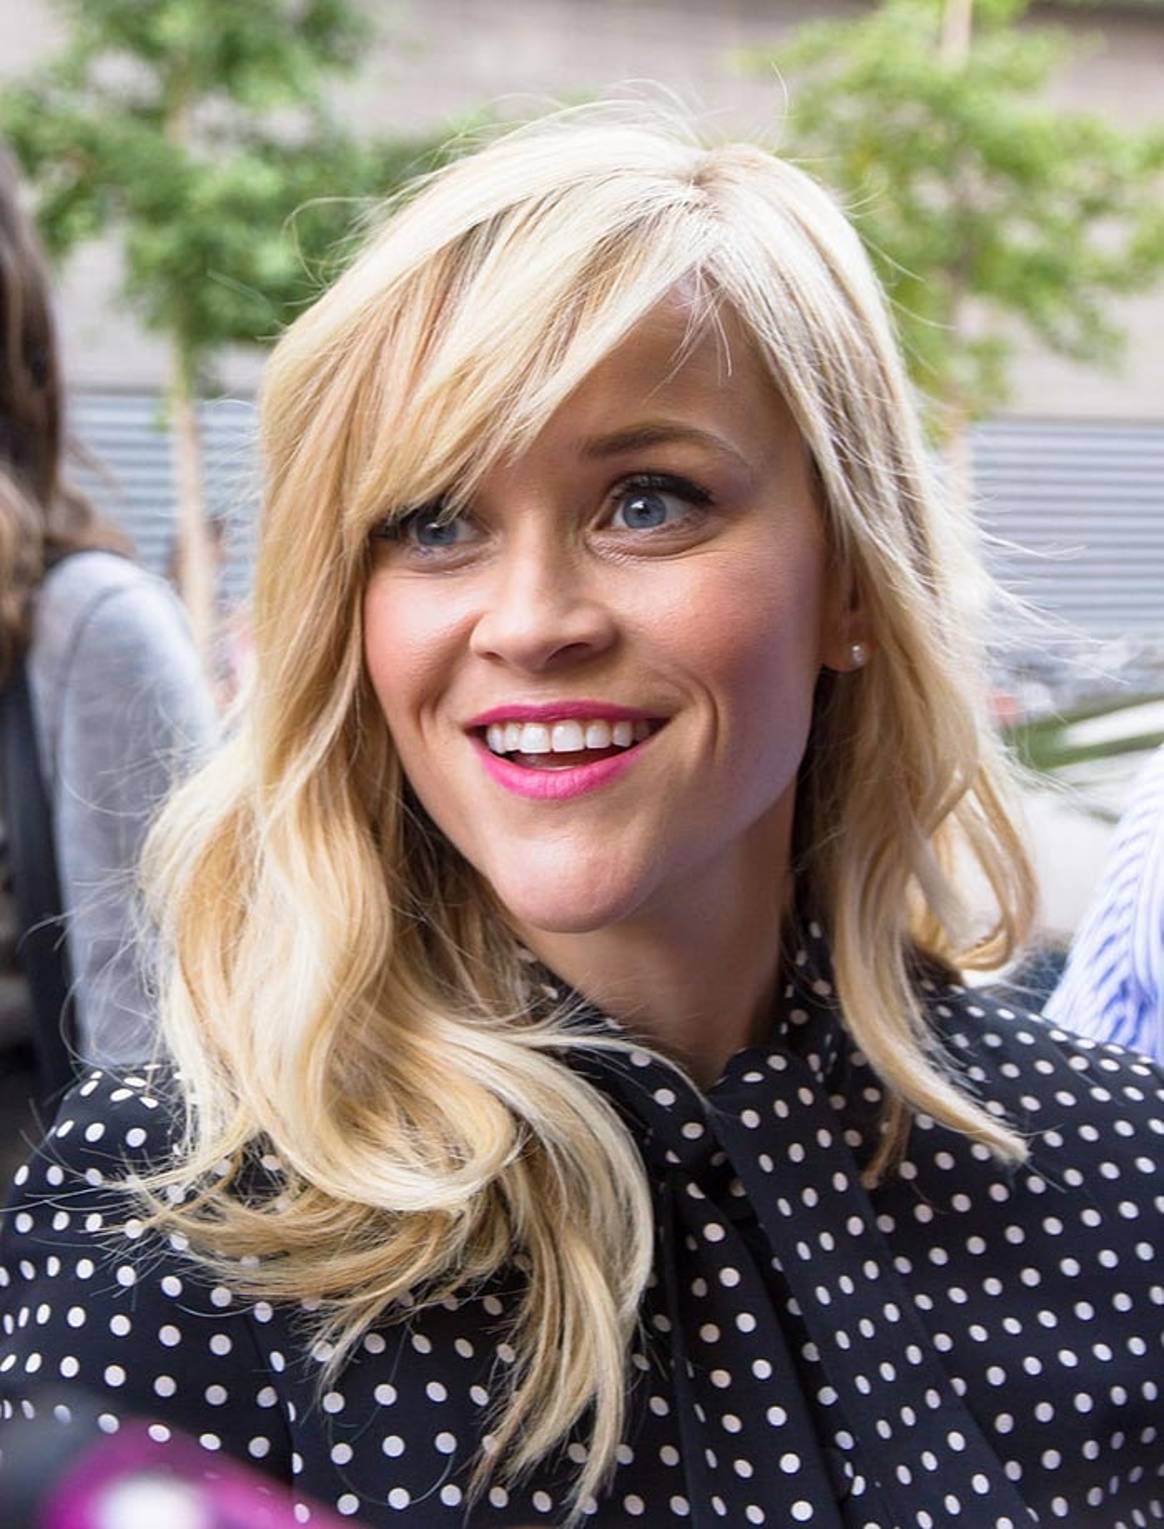 Reese Witherspoon sued for 5 million US dollars